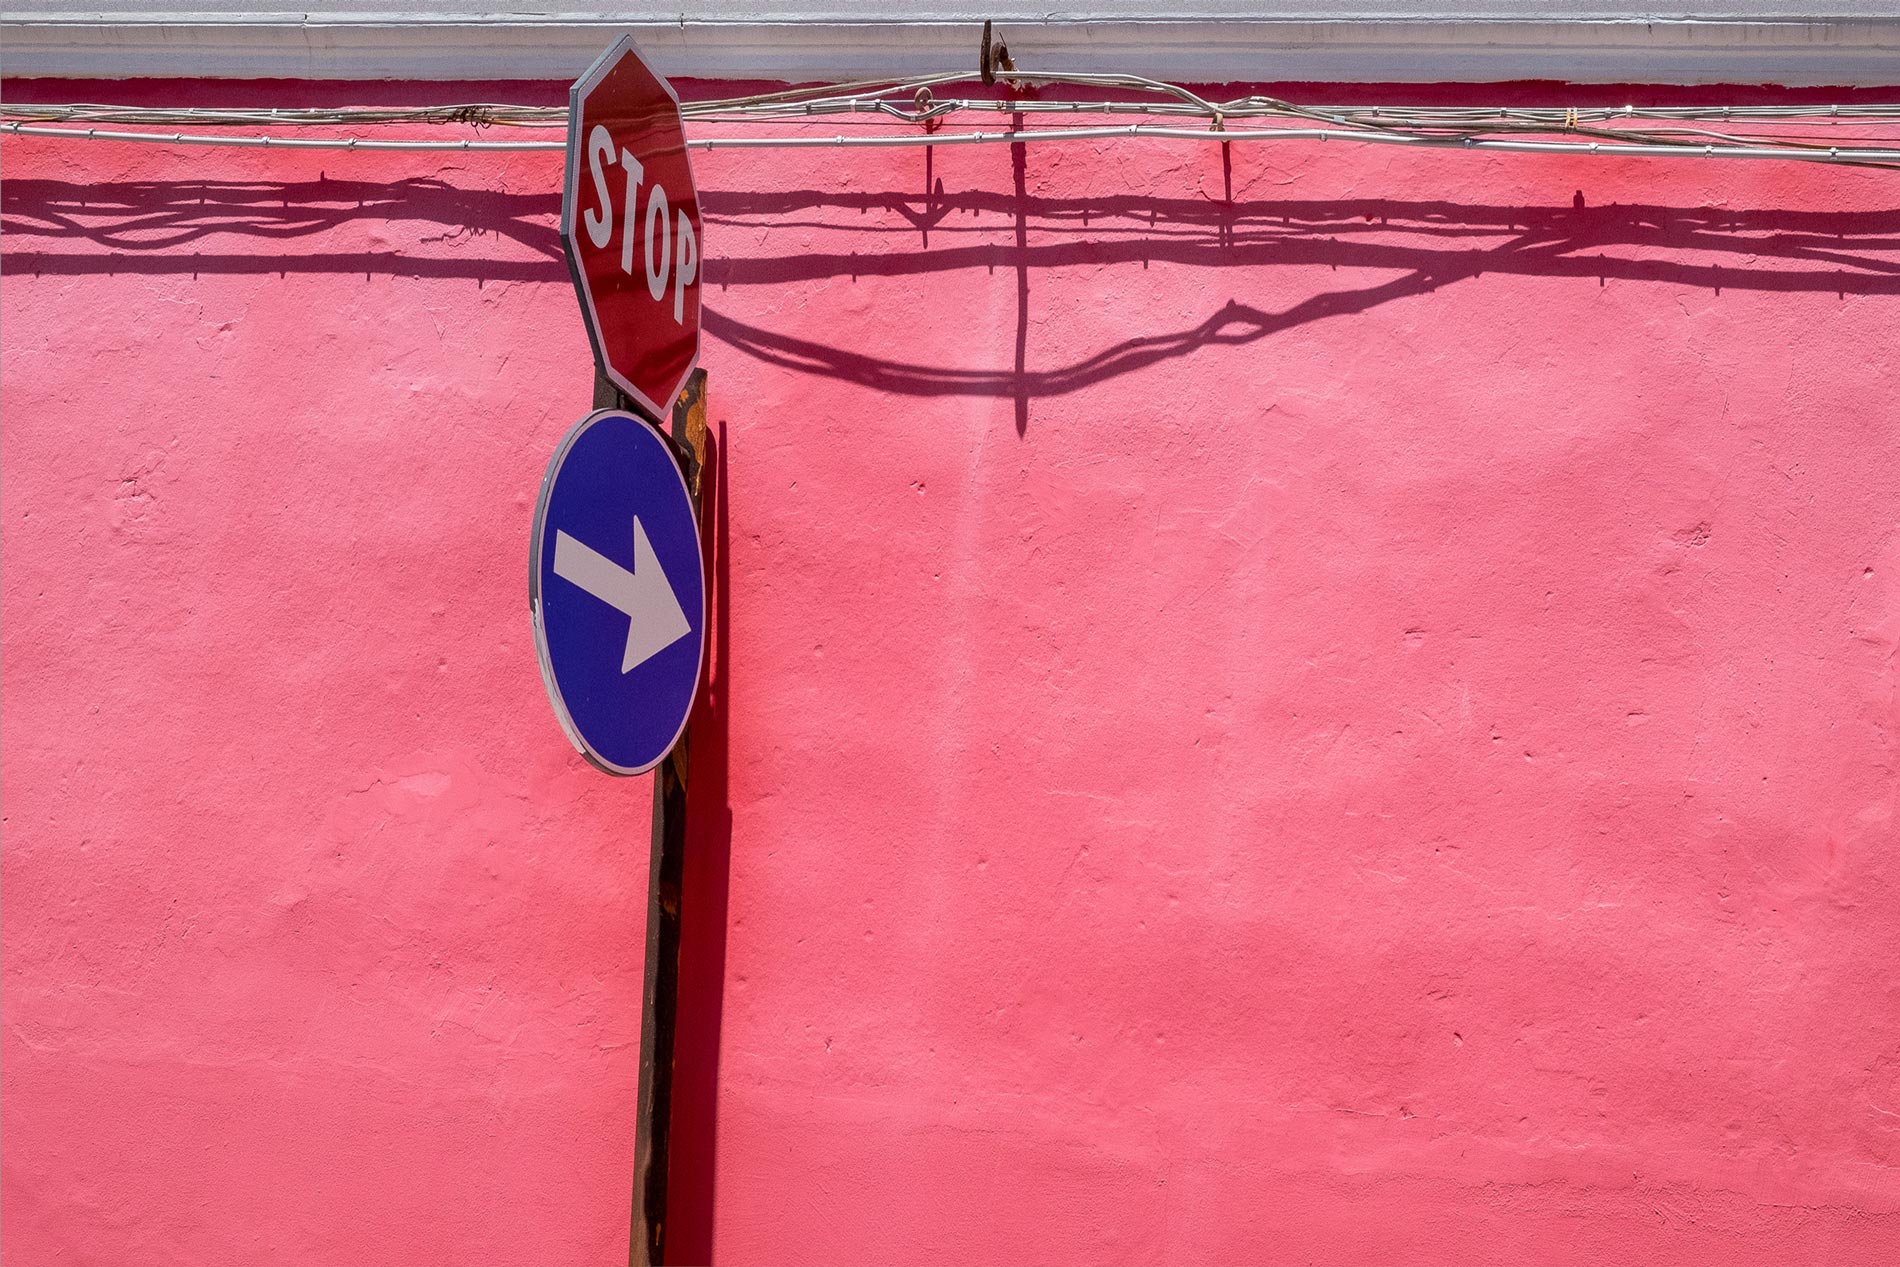 Pink wall and sign - Floridia, Sicily